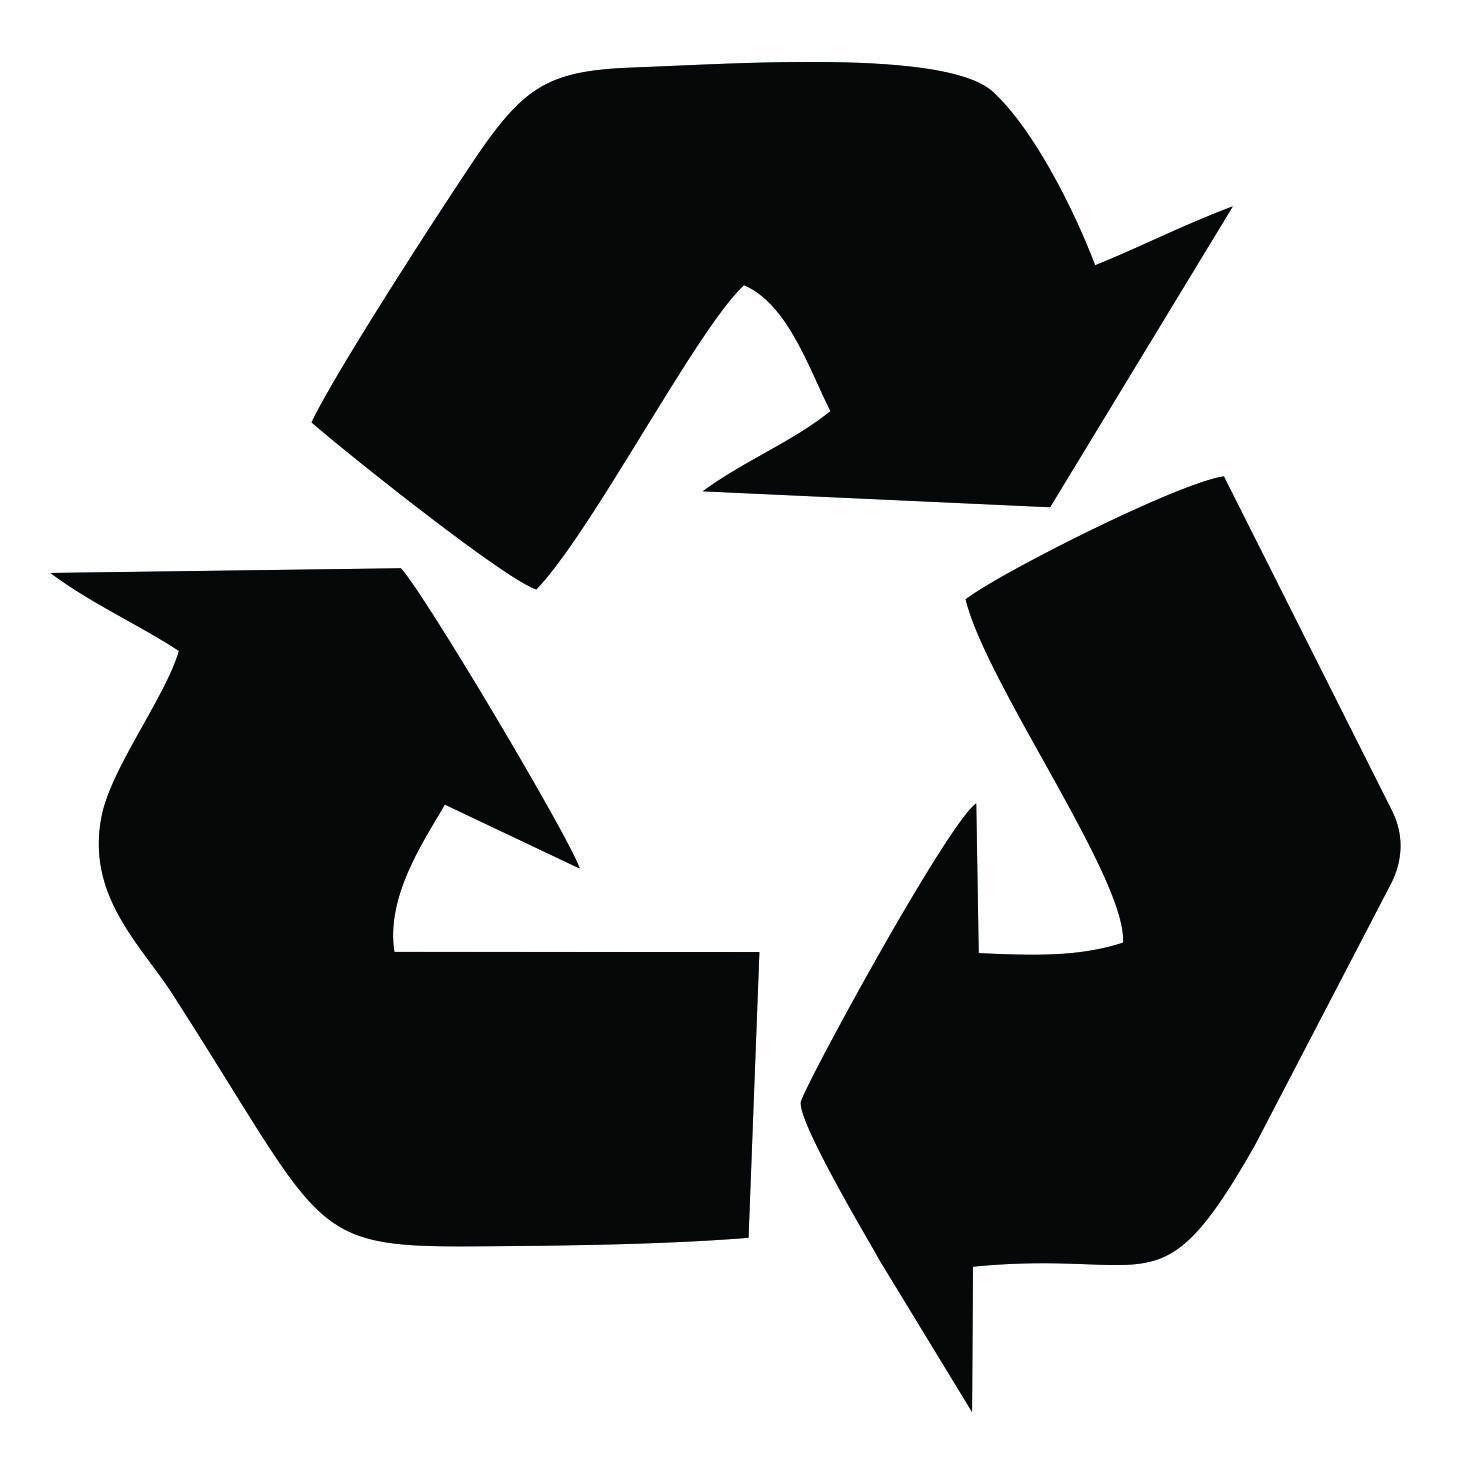 Black and White Recycle Logo - Buy Recycling Symbol BLACK Vinyl Cut Out Sticker 4.5